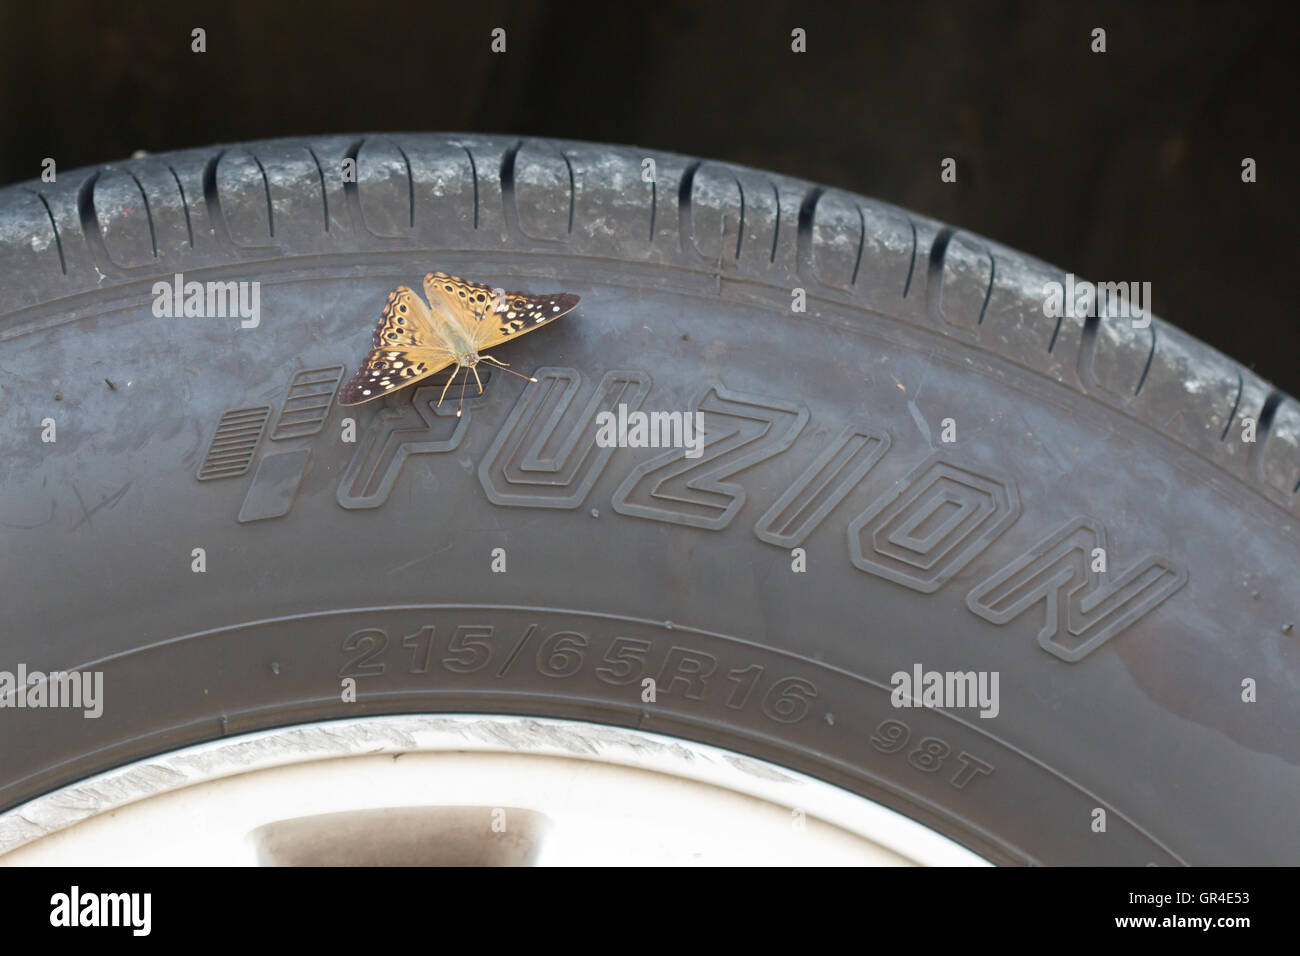 A Hackberry Emperor butterfly (Asterocampa celtis) obtaining salt and minerals from a Fuzion car tyre / tire, Indiana, USA Stock Photo